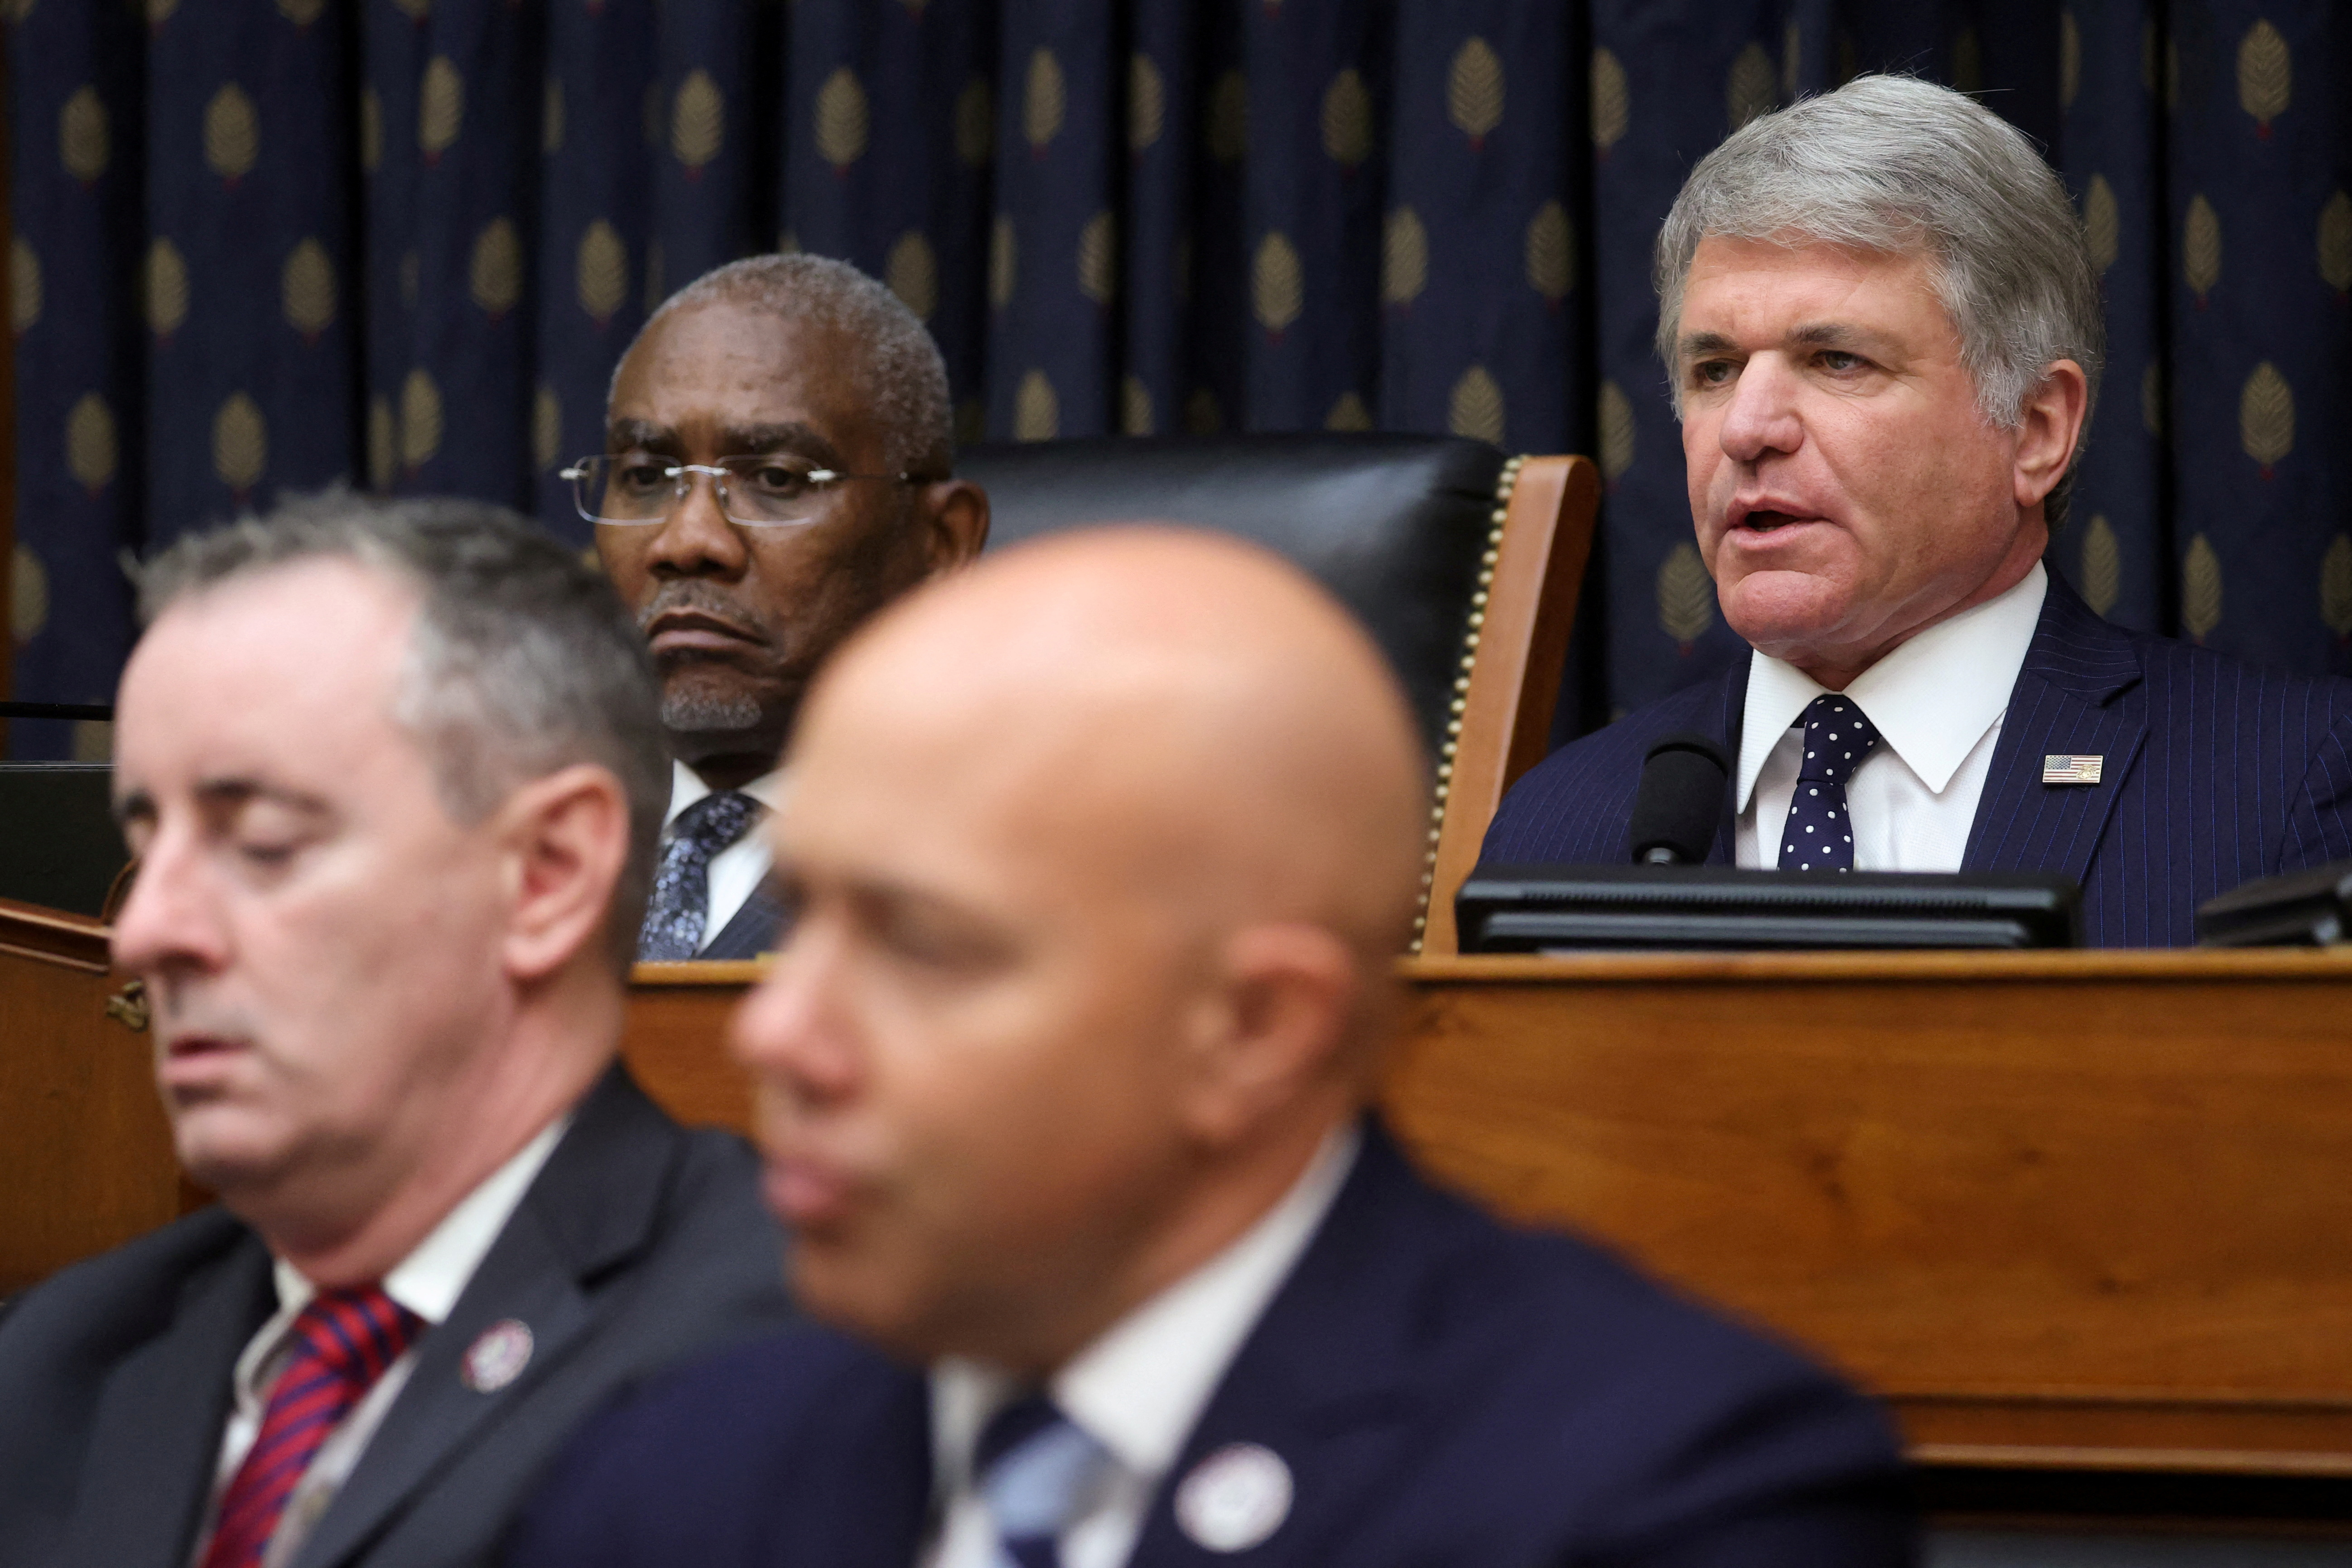 House Foreign Affairs Committee Chairman Meeks and Rep. McCaul preside as Blinken testifies on the U.S. withdrawal from Afghanistan at a virtual committee hearing in Washington